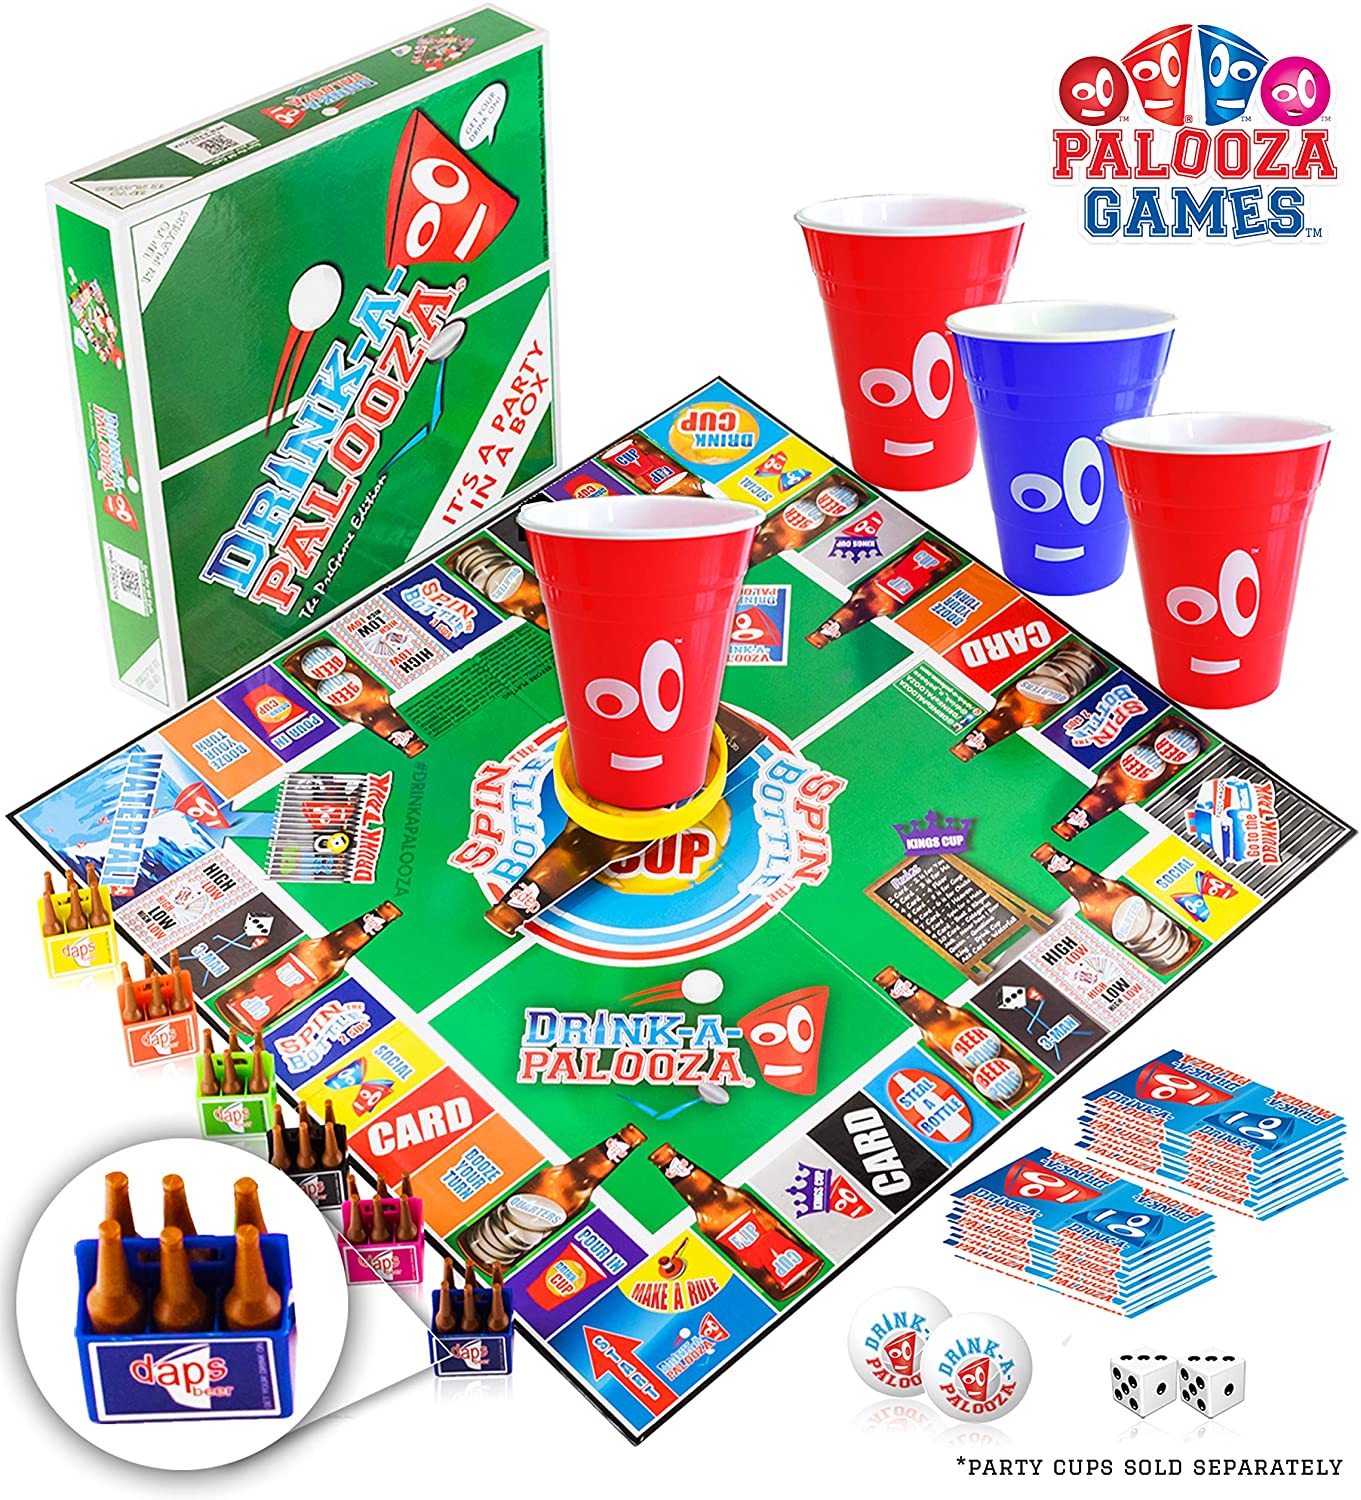 Image of drink-a-palooza drinking board game